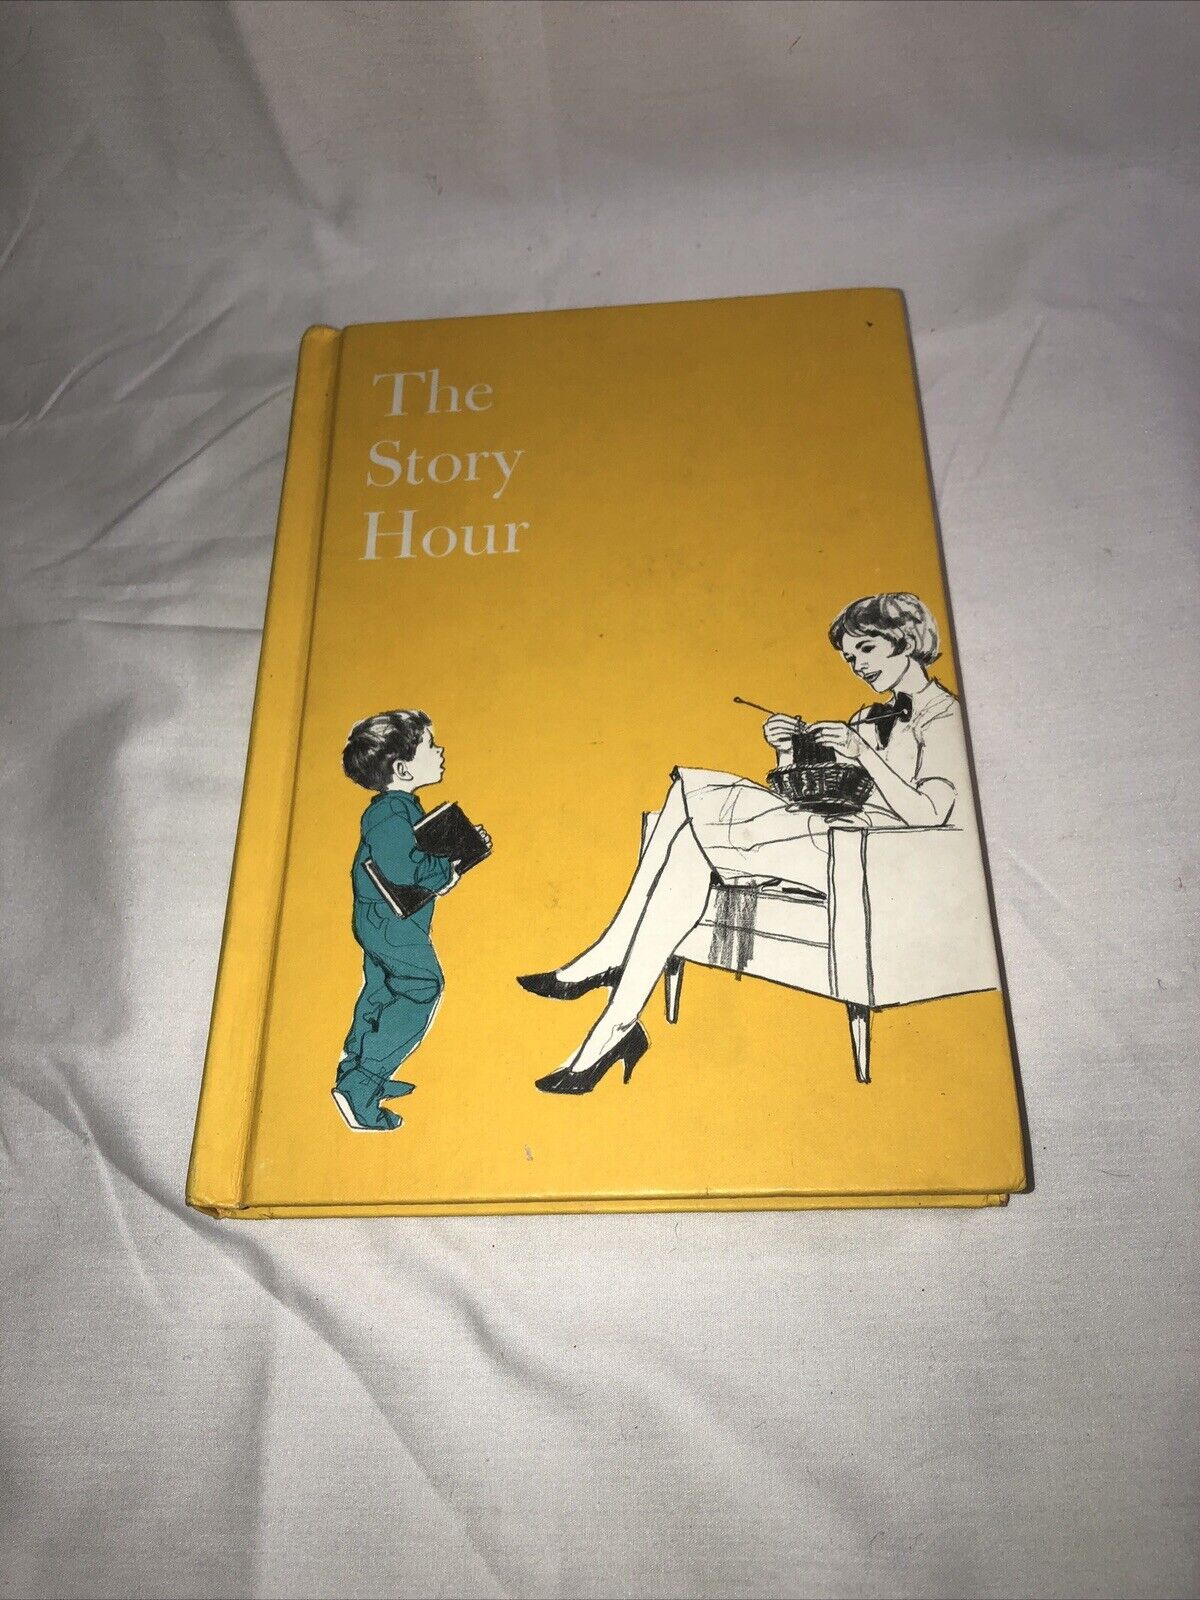 The Story Hour. Complied by Esther Bjoland. (HB, 1977)